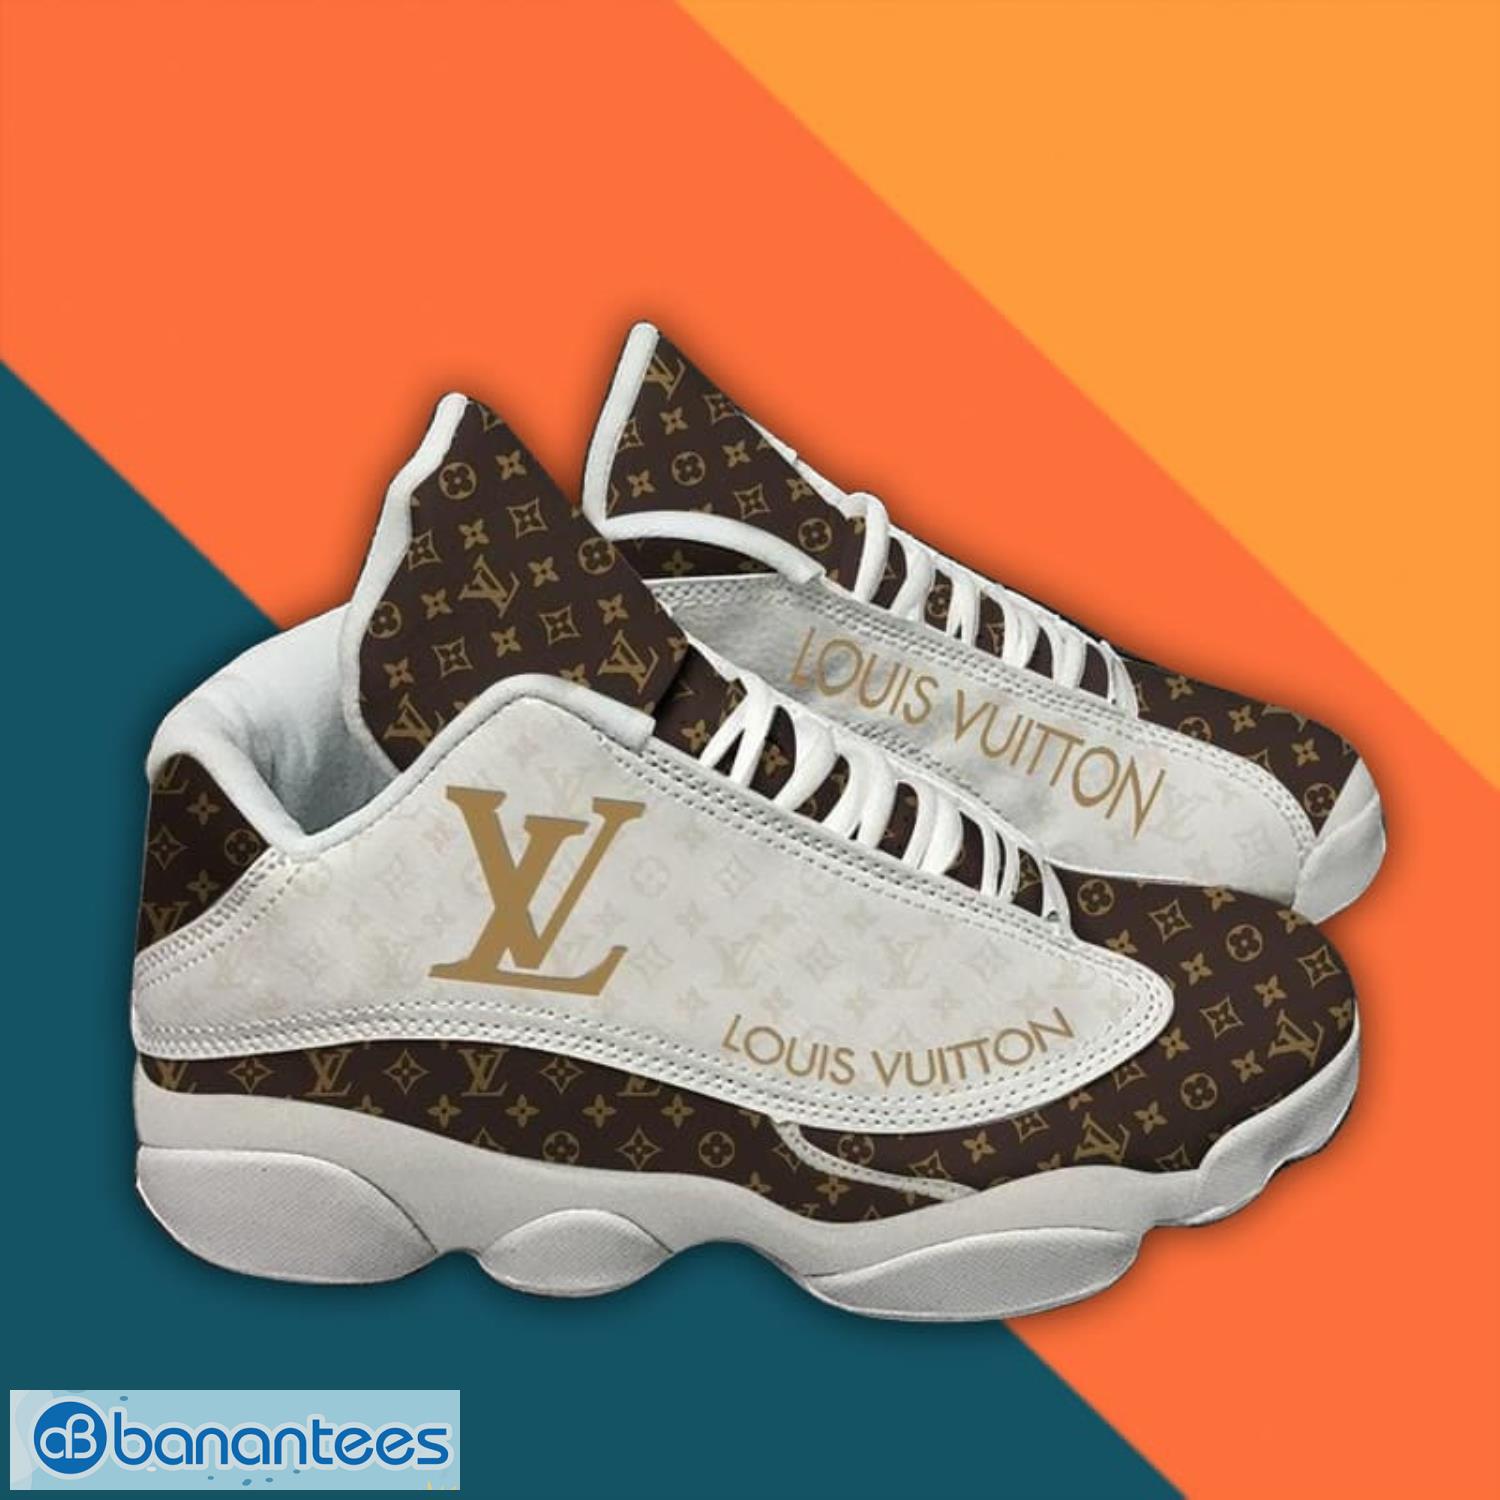 Louis Vuitton White And Brown Air Jordan 13 Sneaker Shoes Product Photo 3